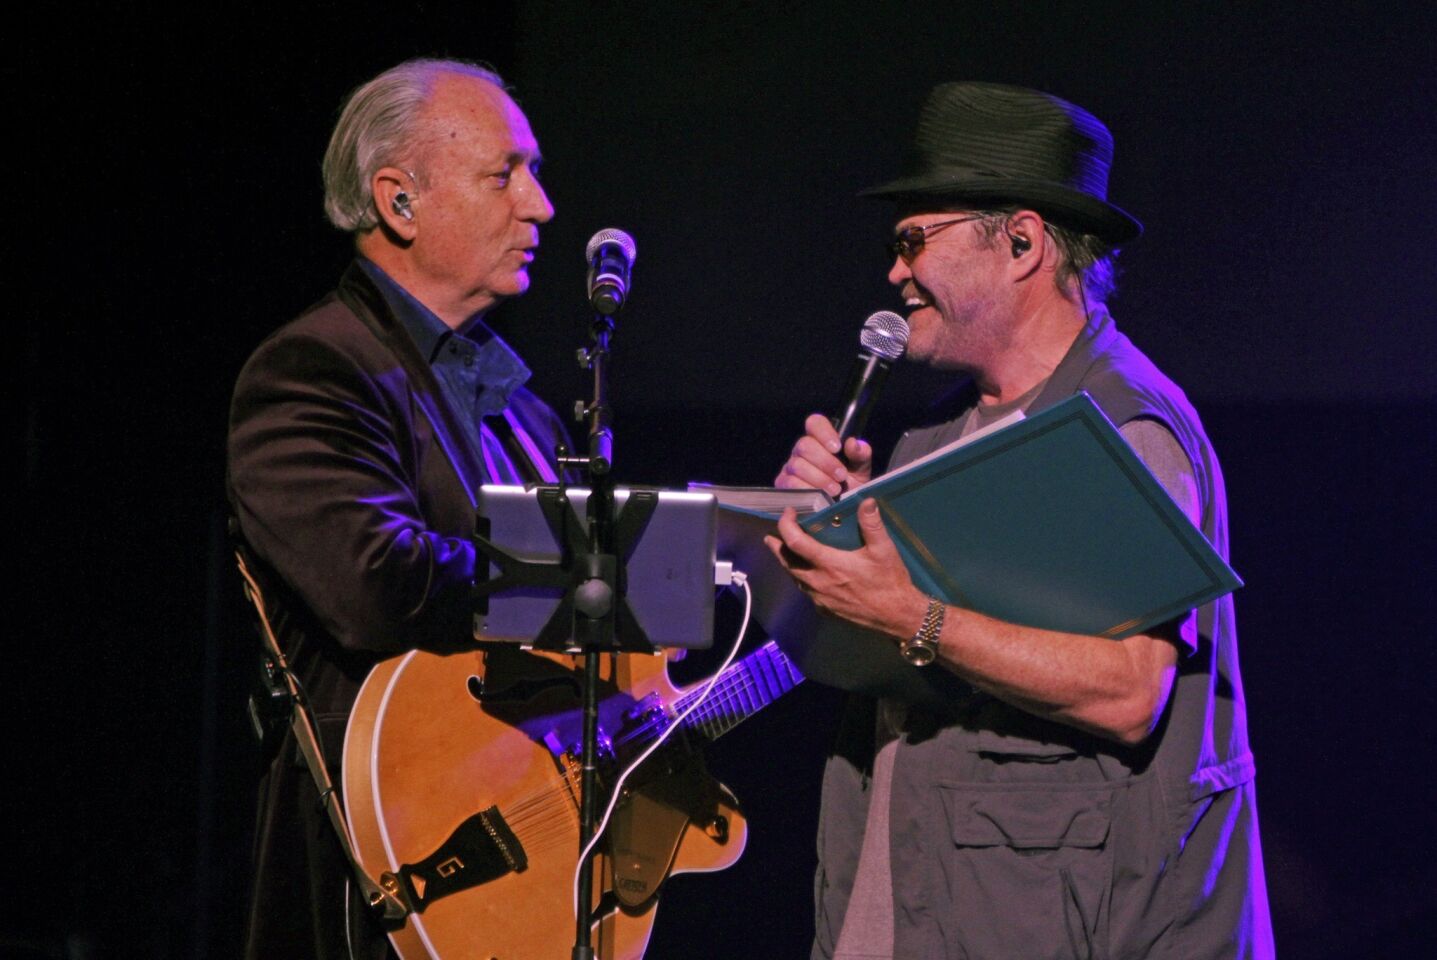 Mike Nesmith and Micky Dolenz